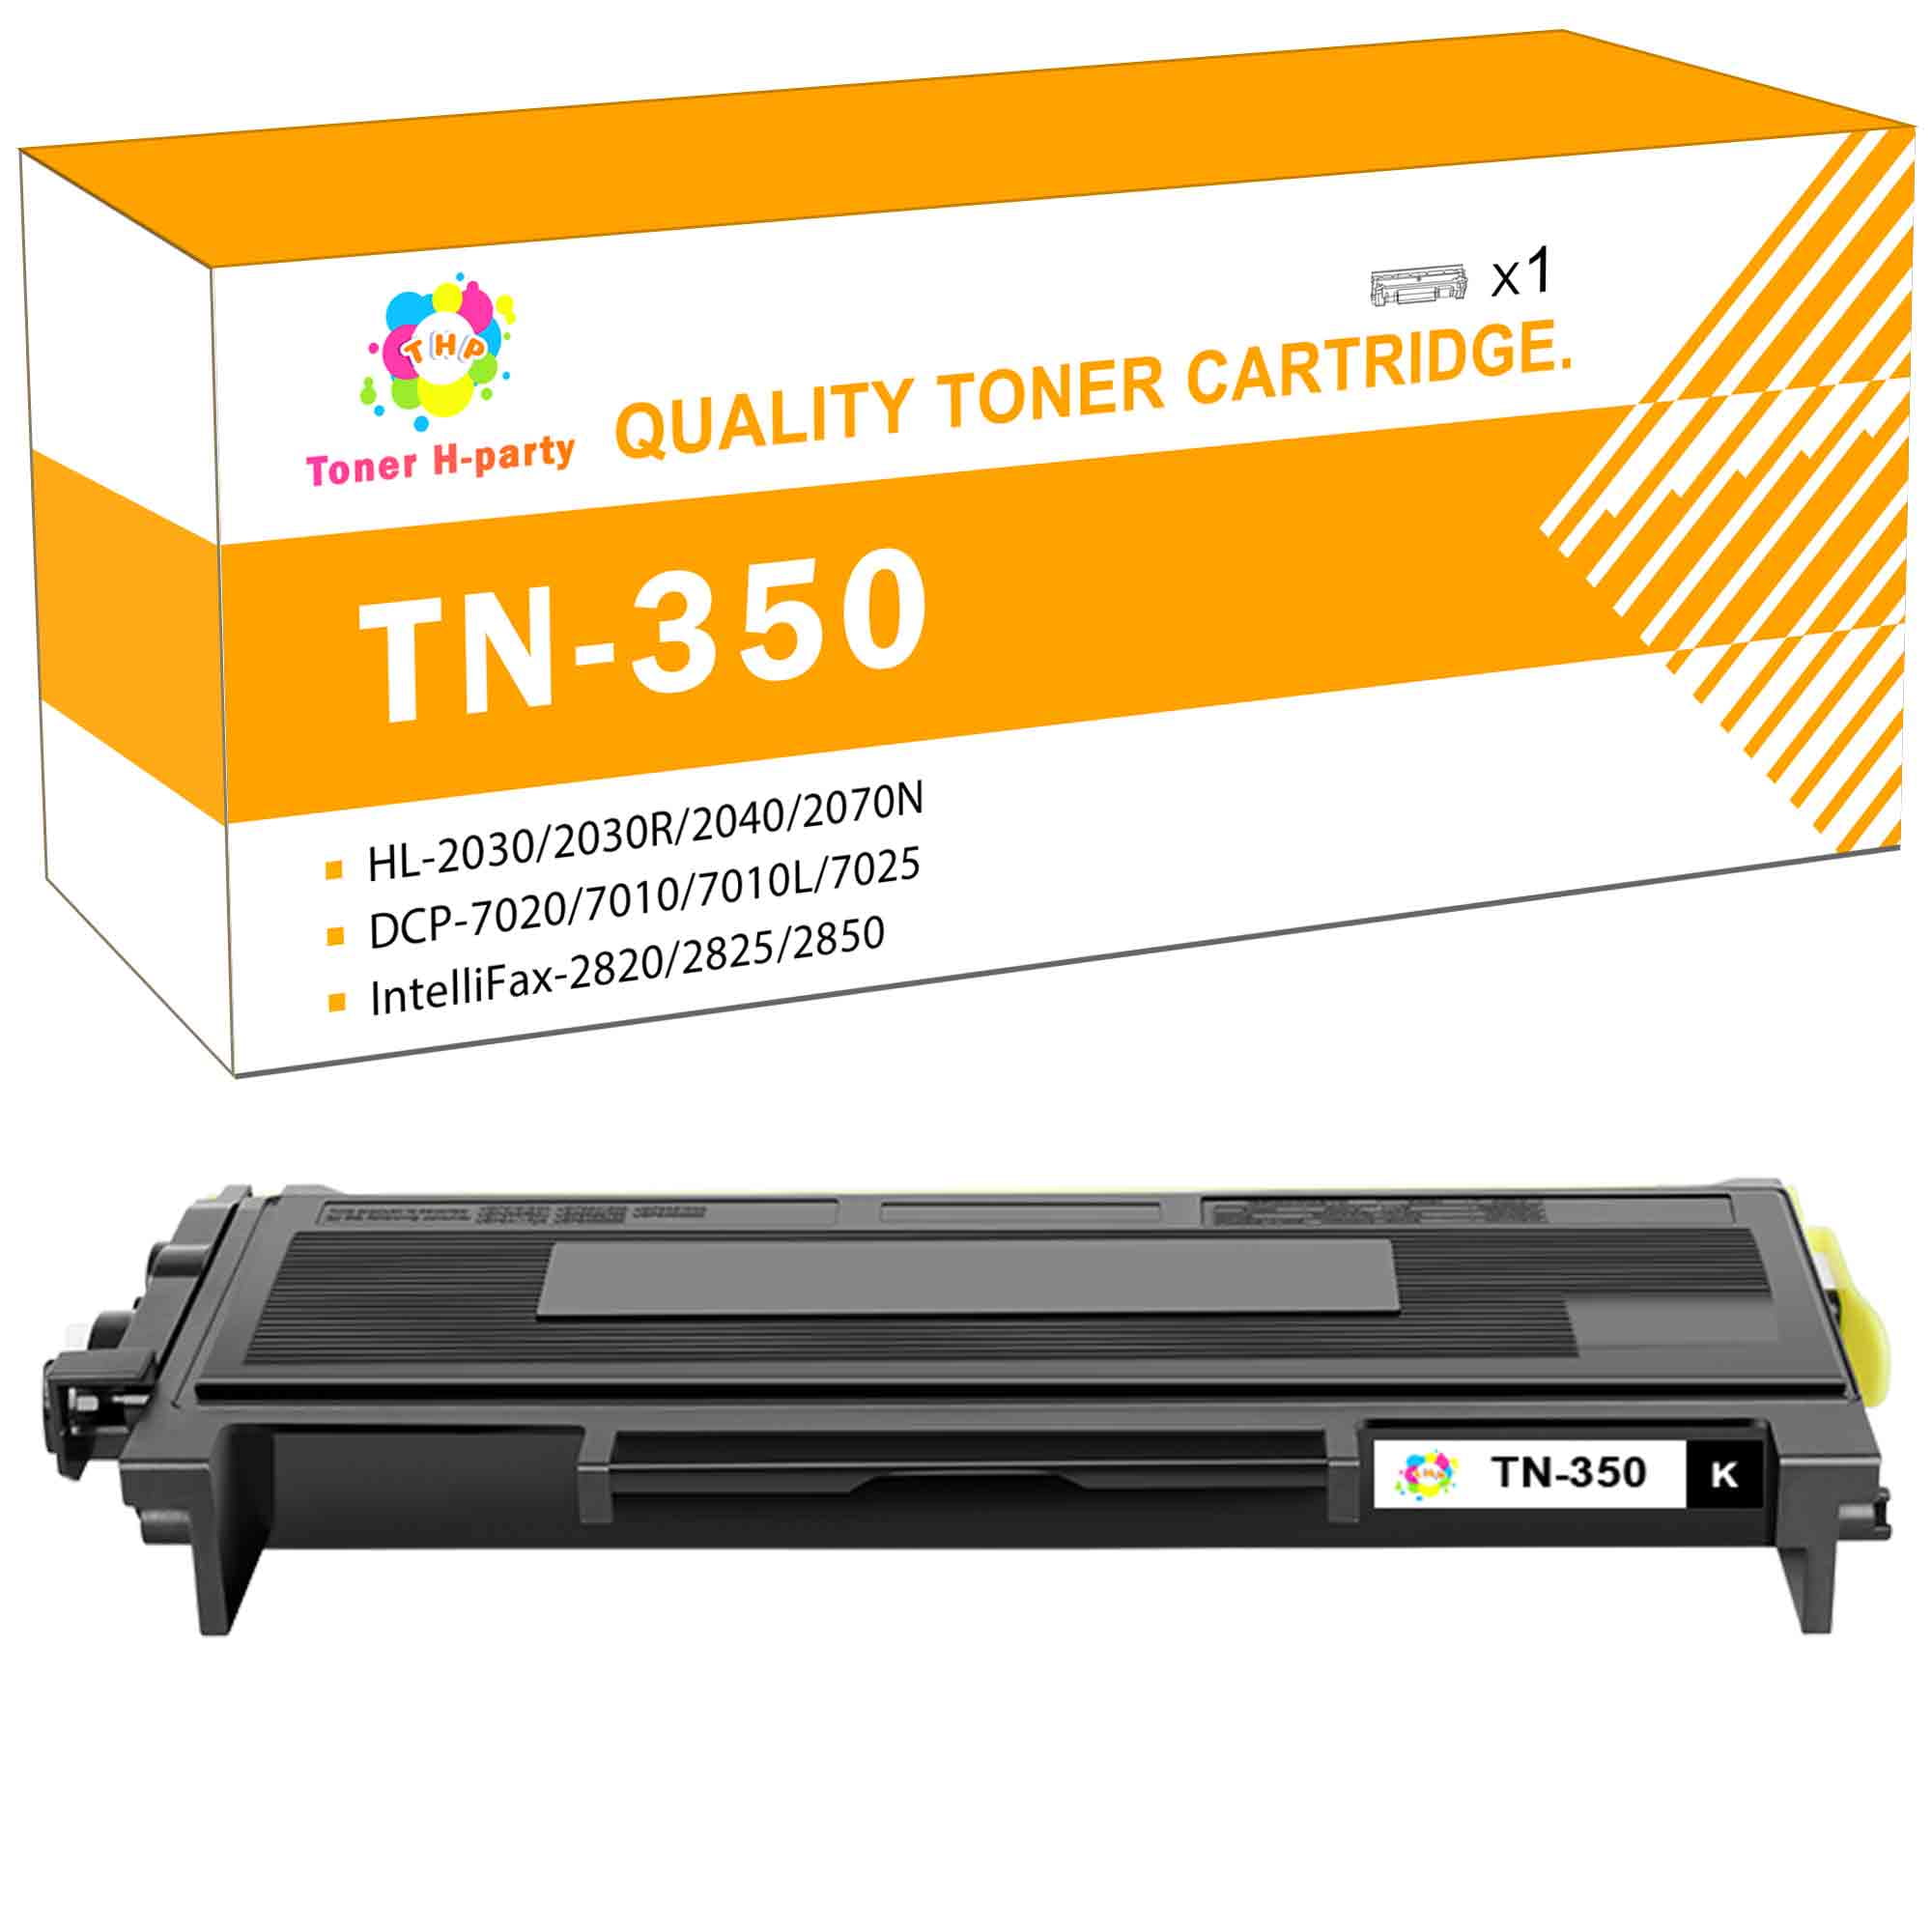 nordøst radium Frontier Toner H-Party Compatible Toner Cartridge Replacement for Brother TN350  TN-350 HL-2030 2040 2070 2035 2037 2037E MFC-7220 7820N DCP-7010 7020  (Black, 1 Pack) - Walmart.com